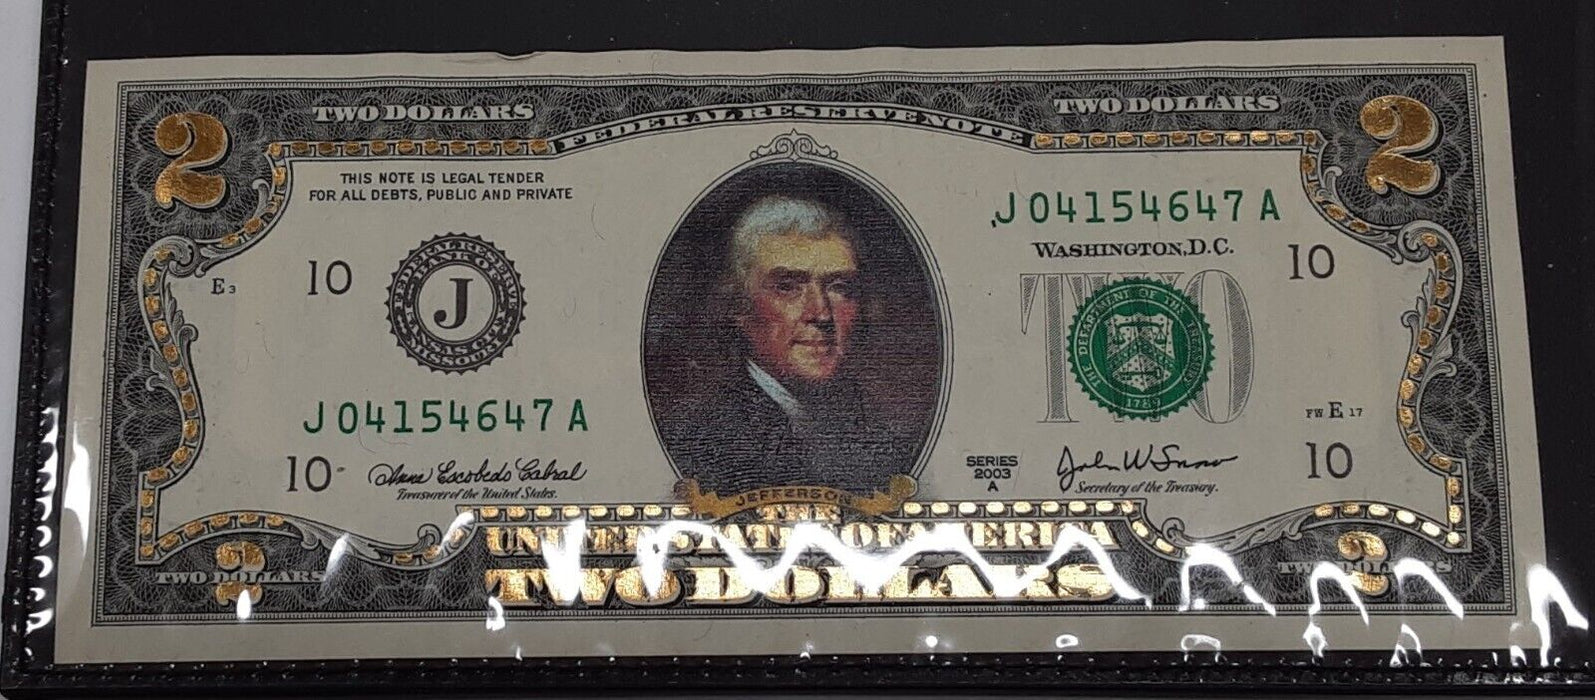 2003-A Colorized $2 FRNs - Pair of Notes in WRME Wallet